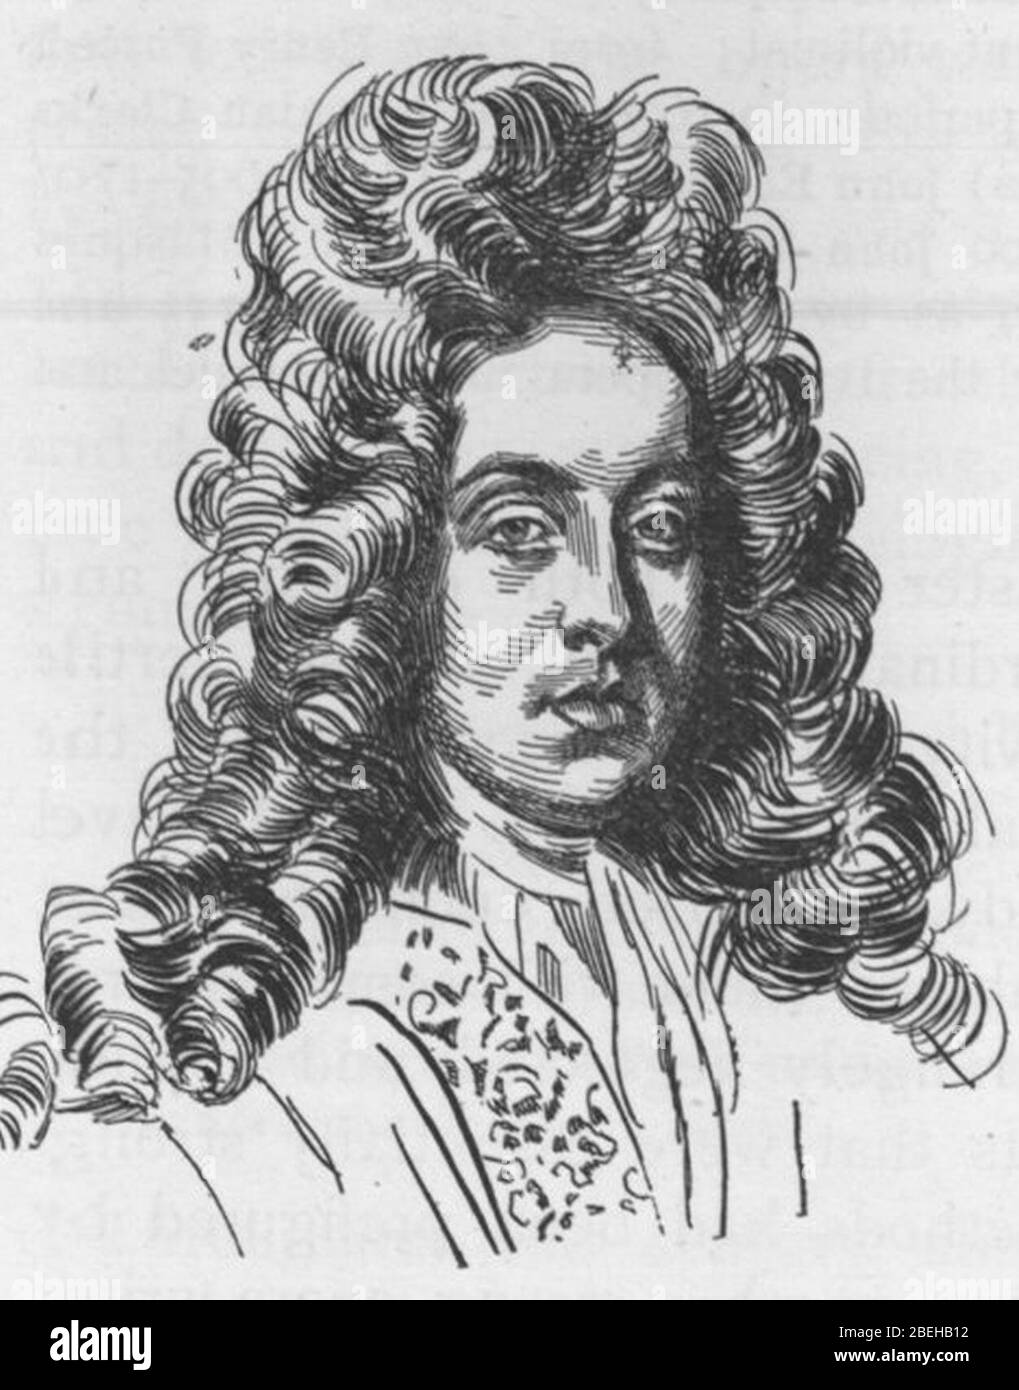 Henry-purcell. Stock Photo